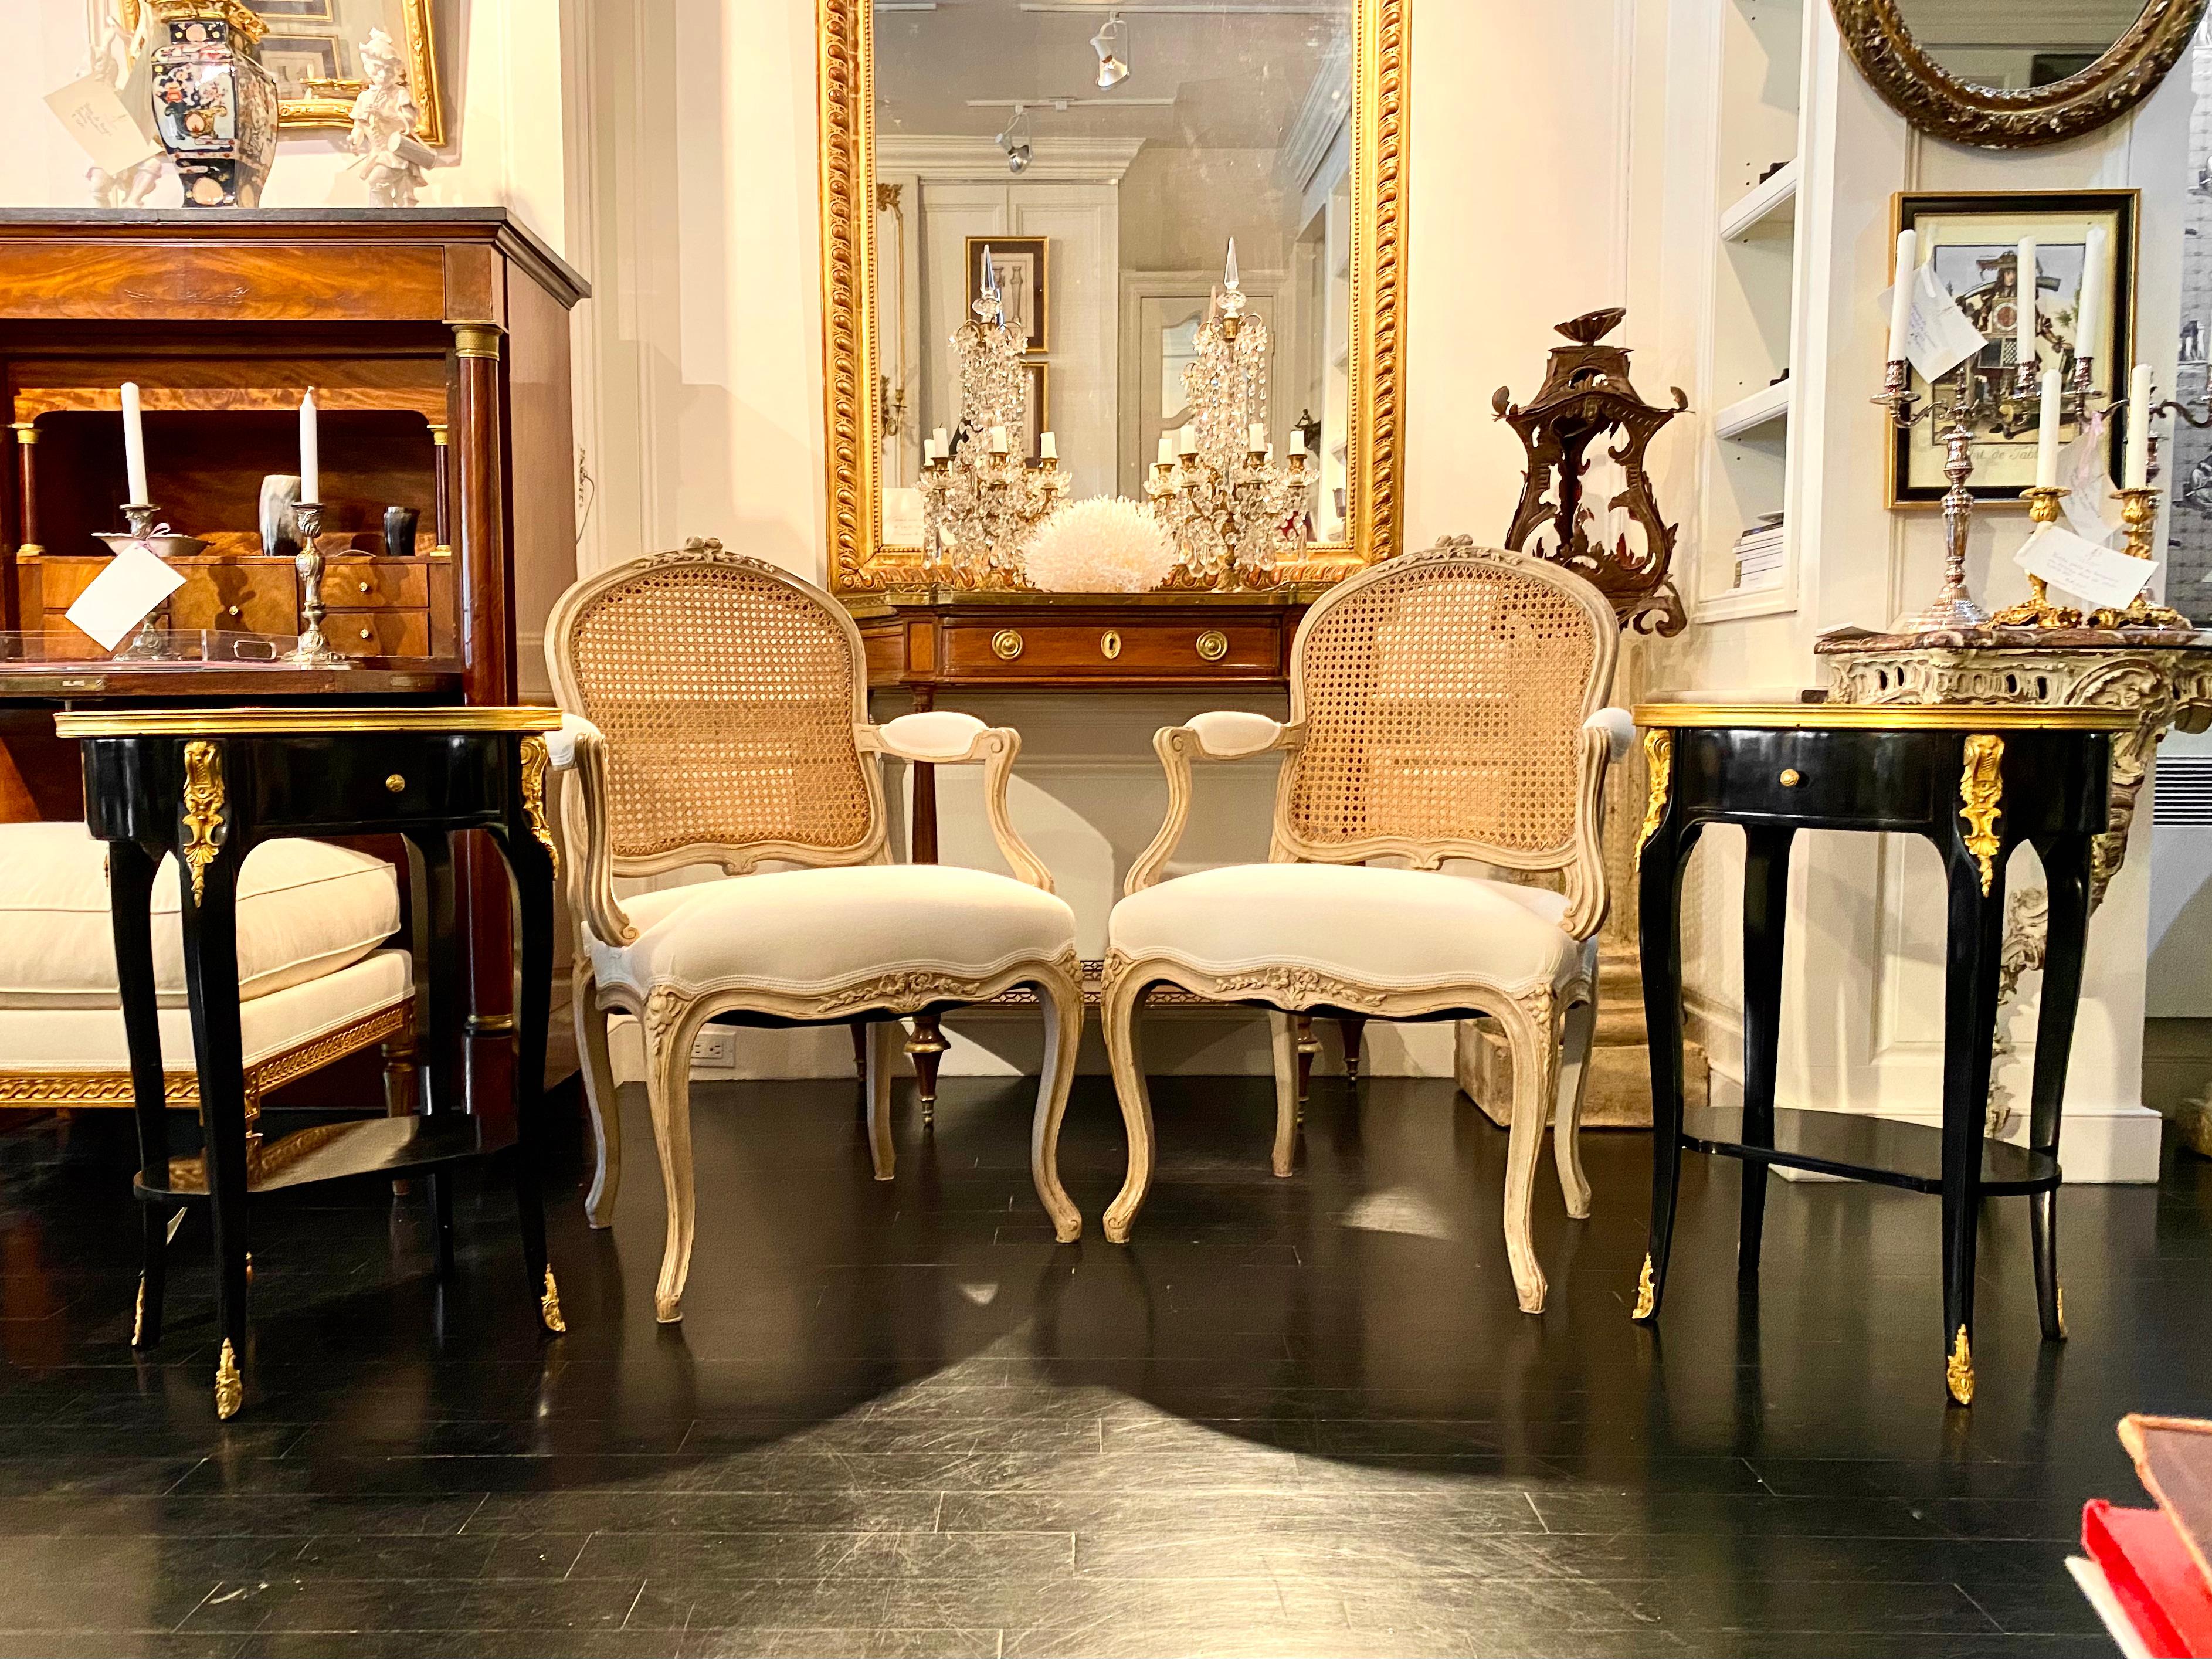 Pair of Louis XV style oval ebonized side tables with marble tops and Ormulu mounts, in the glamorous style of Hollywood Regency. This two-tiered, pair of black lacquer tables is composed of ebonized wood with gilt bronze mounts. The pair of tables